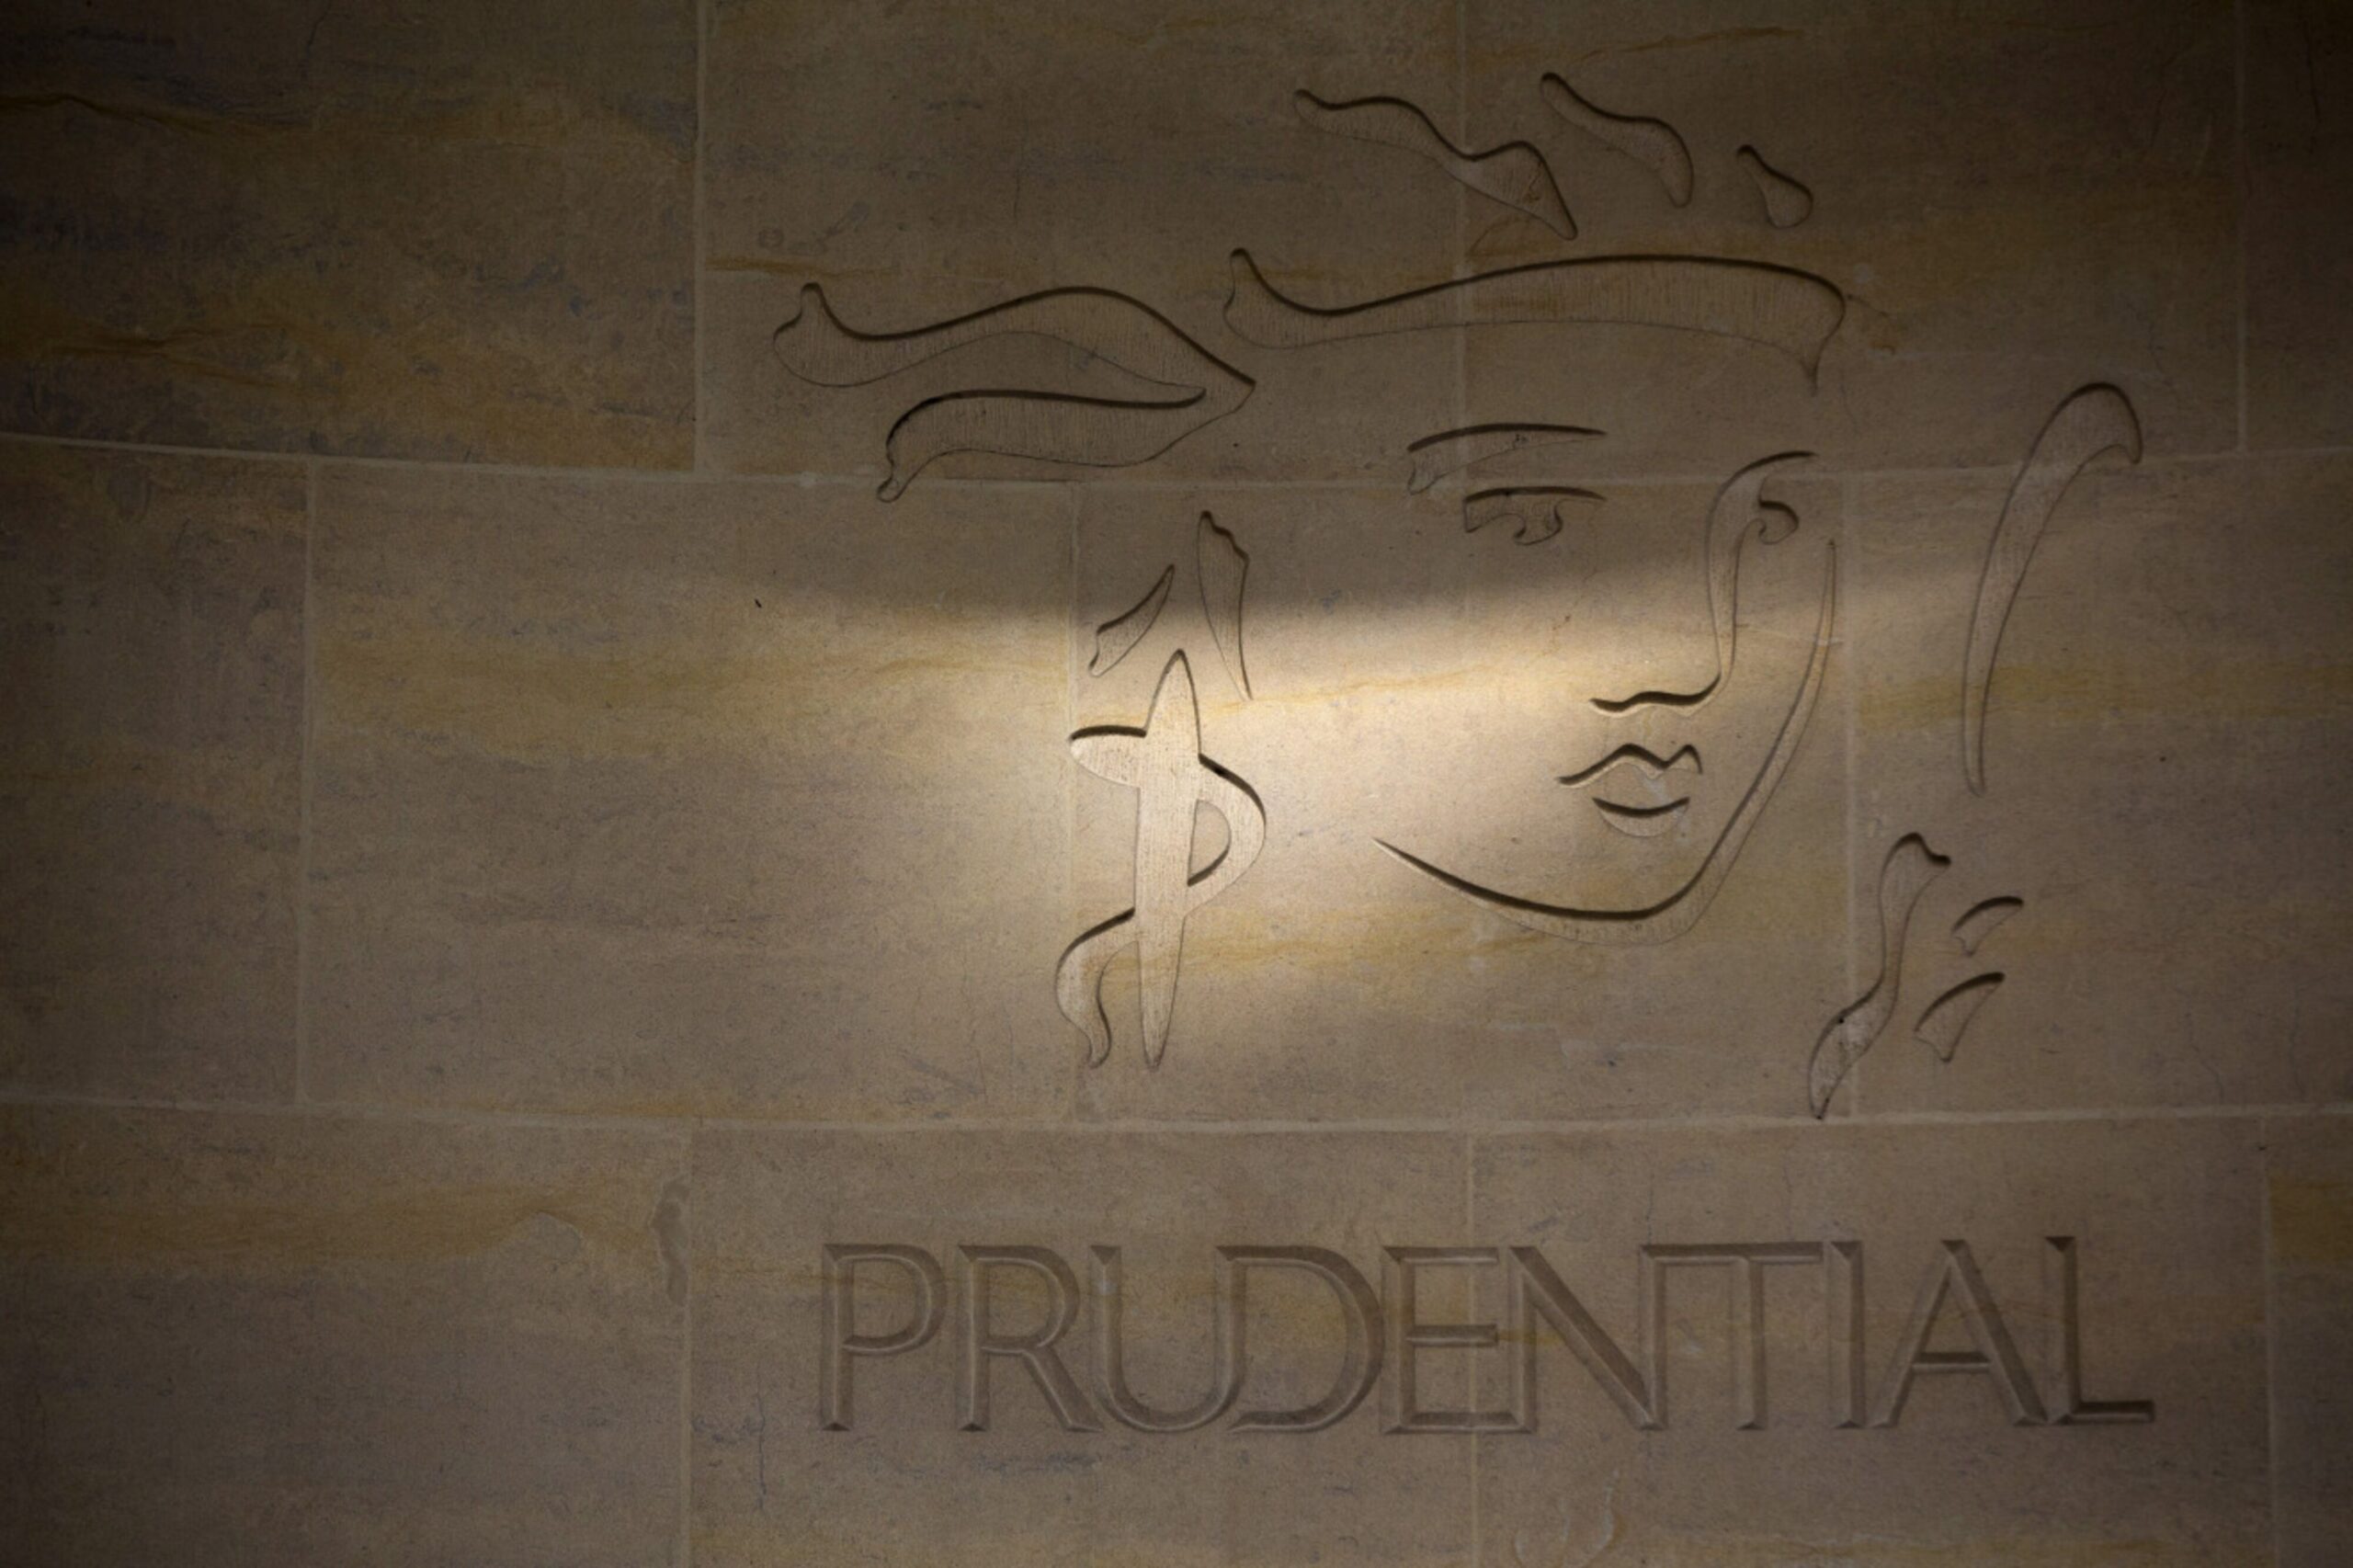 CFO of UK’s Prudential Resigns Amid Probe Into Conduct